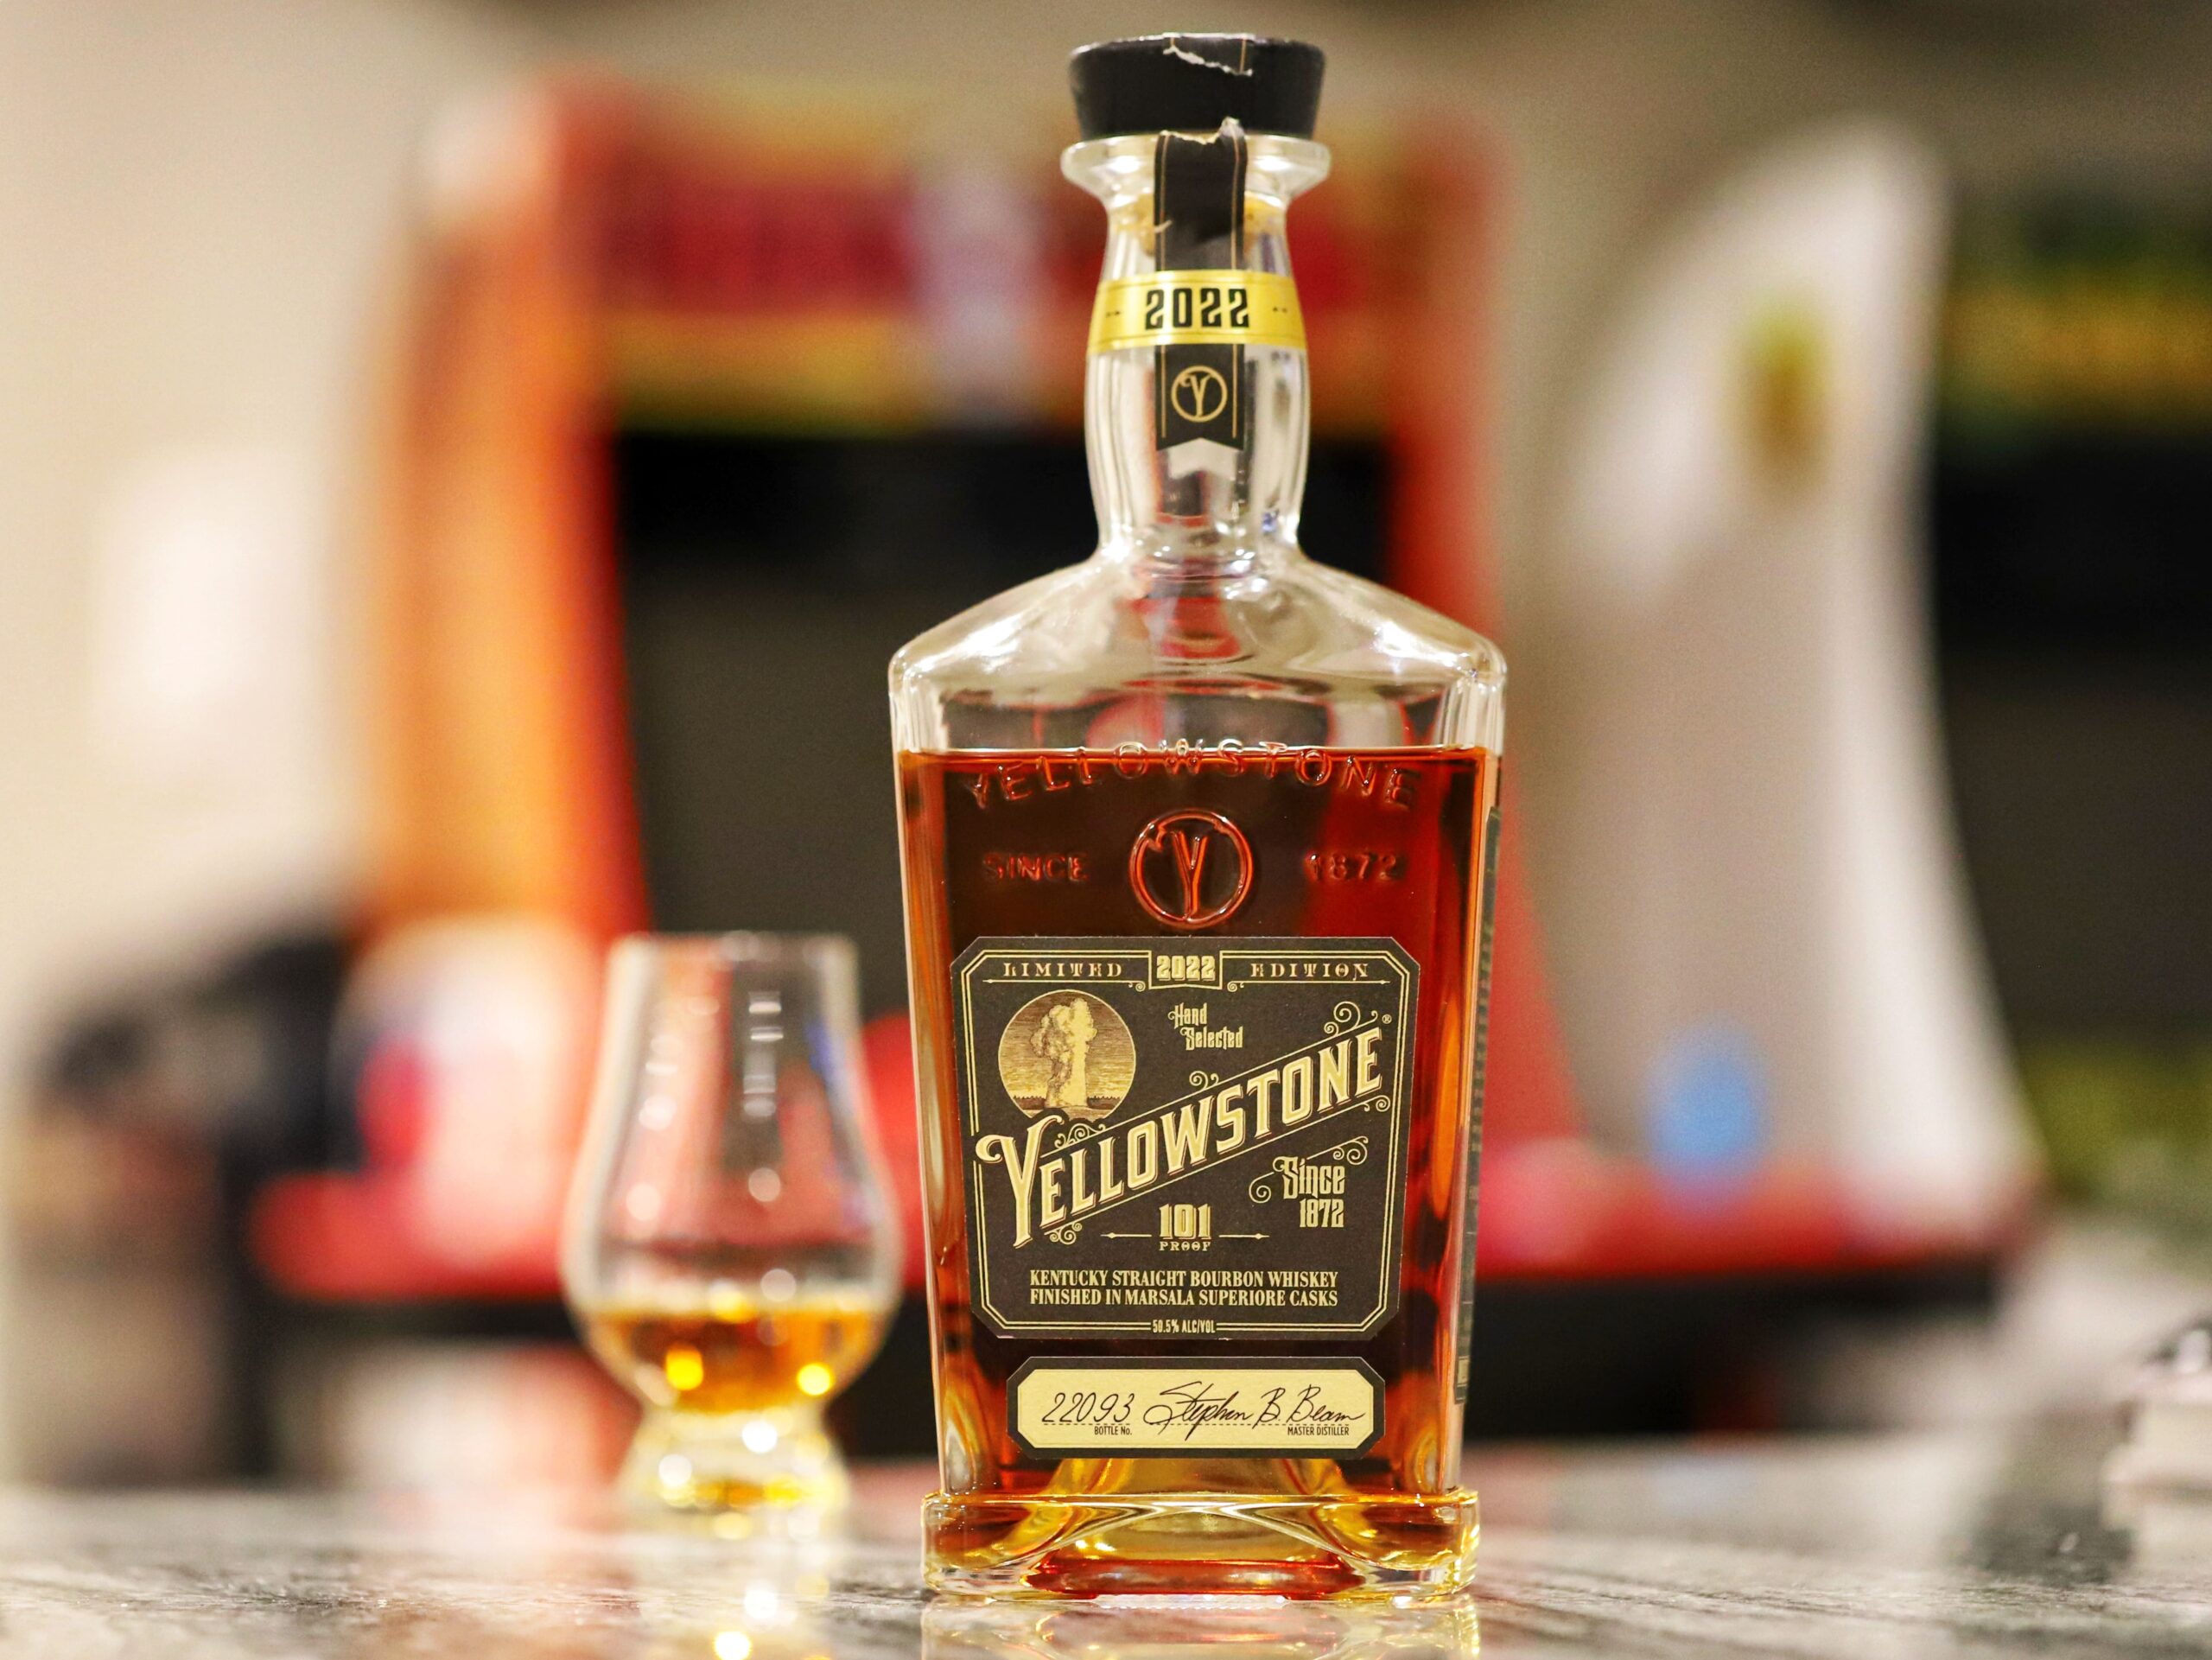 Yellowstone Limited Edition Bourbon (2022, Marsala Superiore Cask Finish) Review